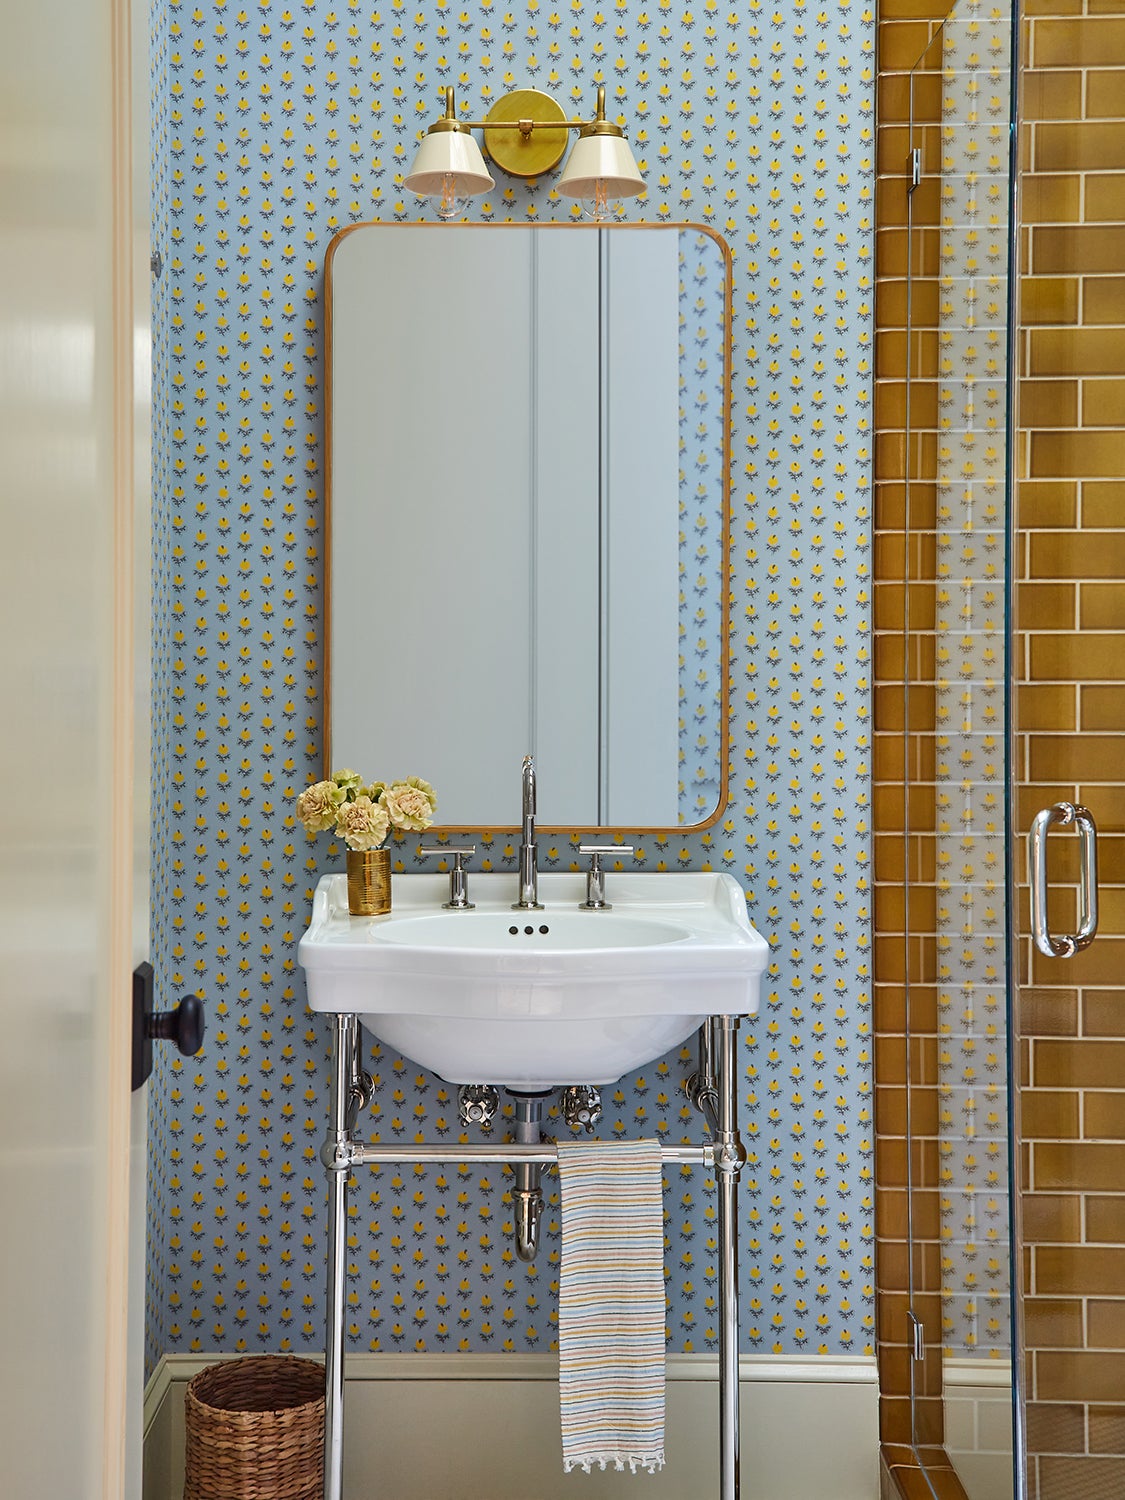 Bathroom with floral wallpaper and mustard tiles